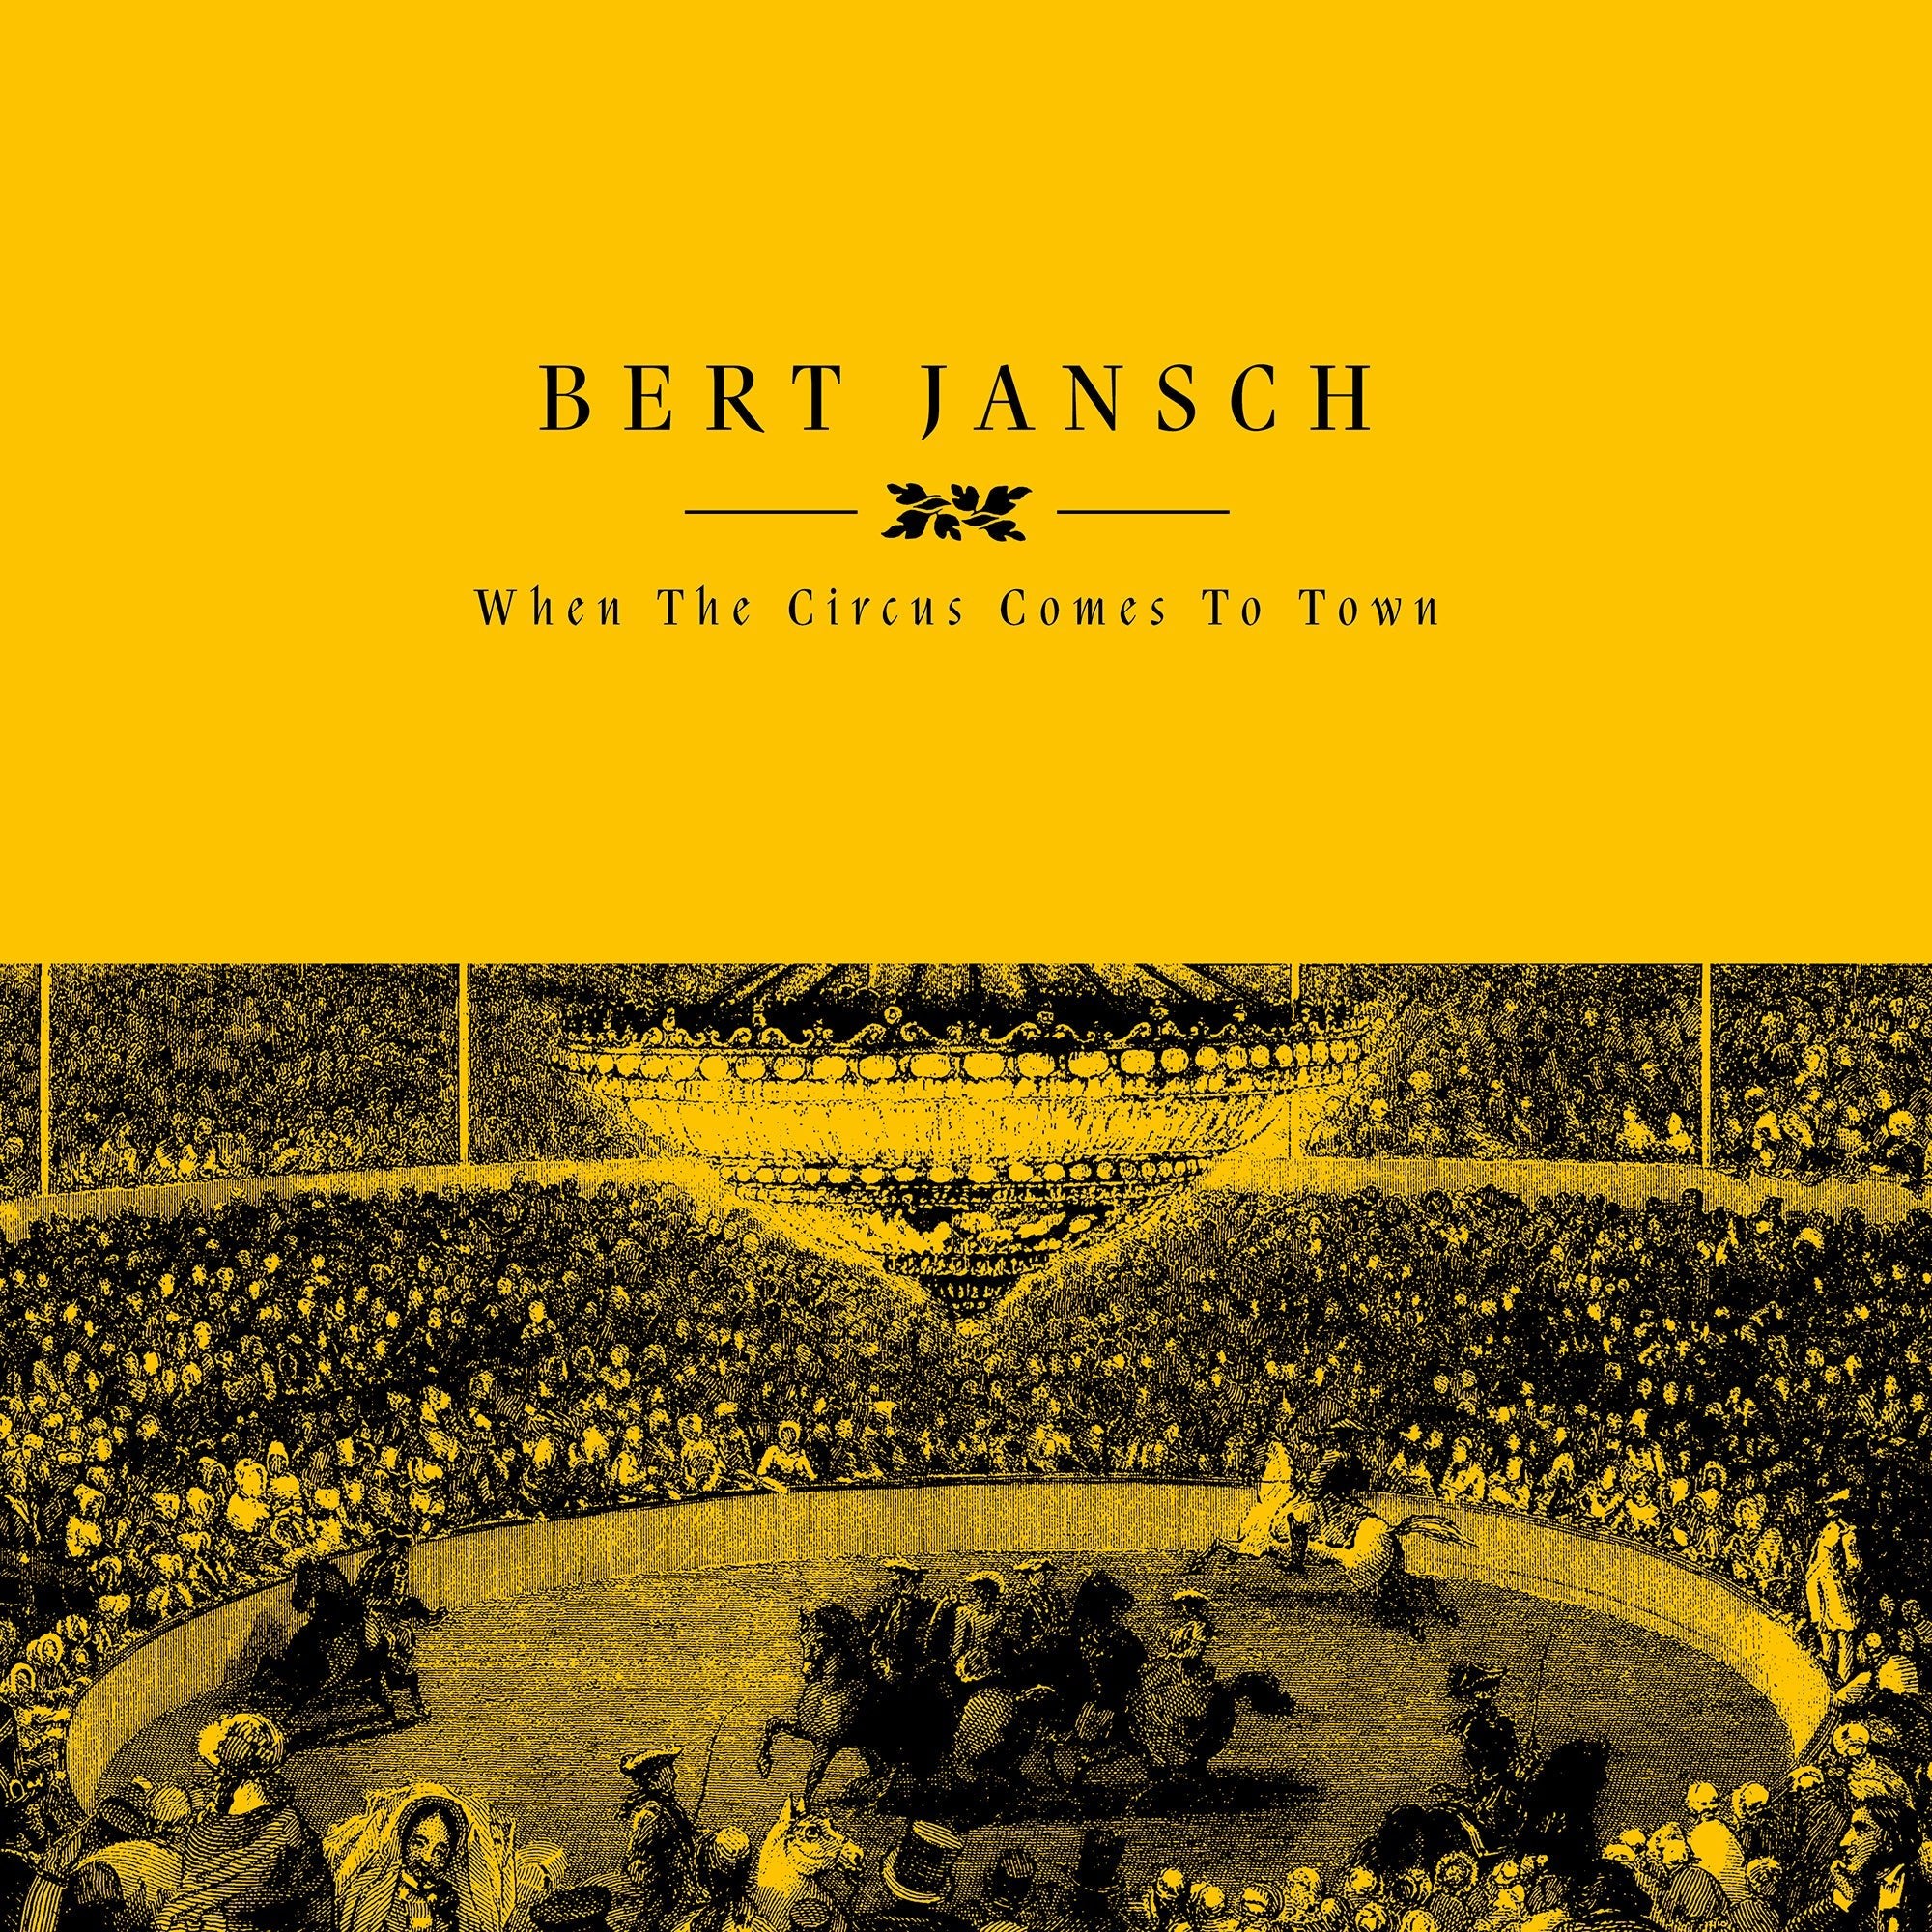 Bert Jansch - When The Circus Comes To Town - 33RPM